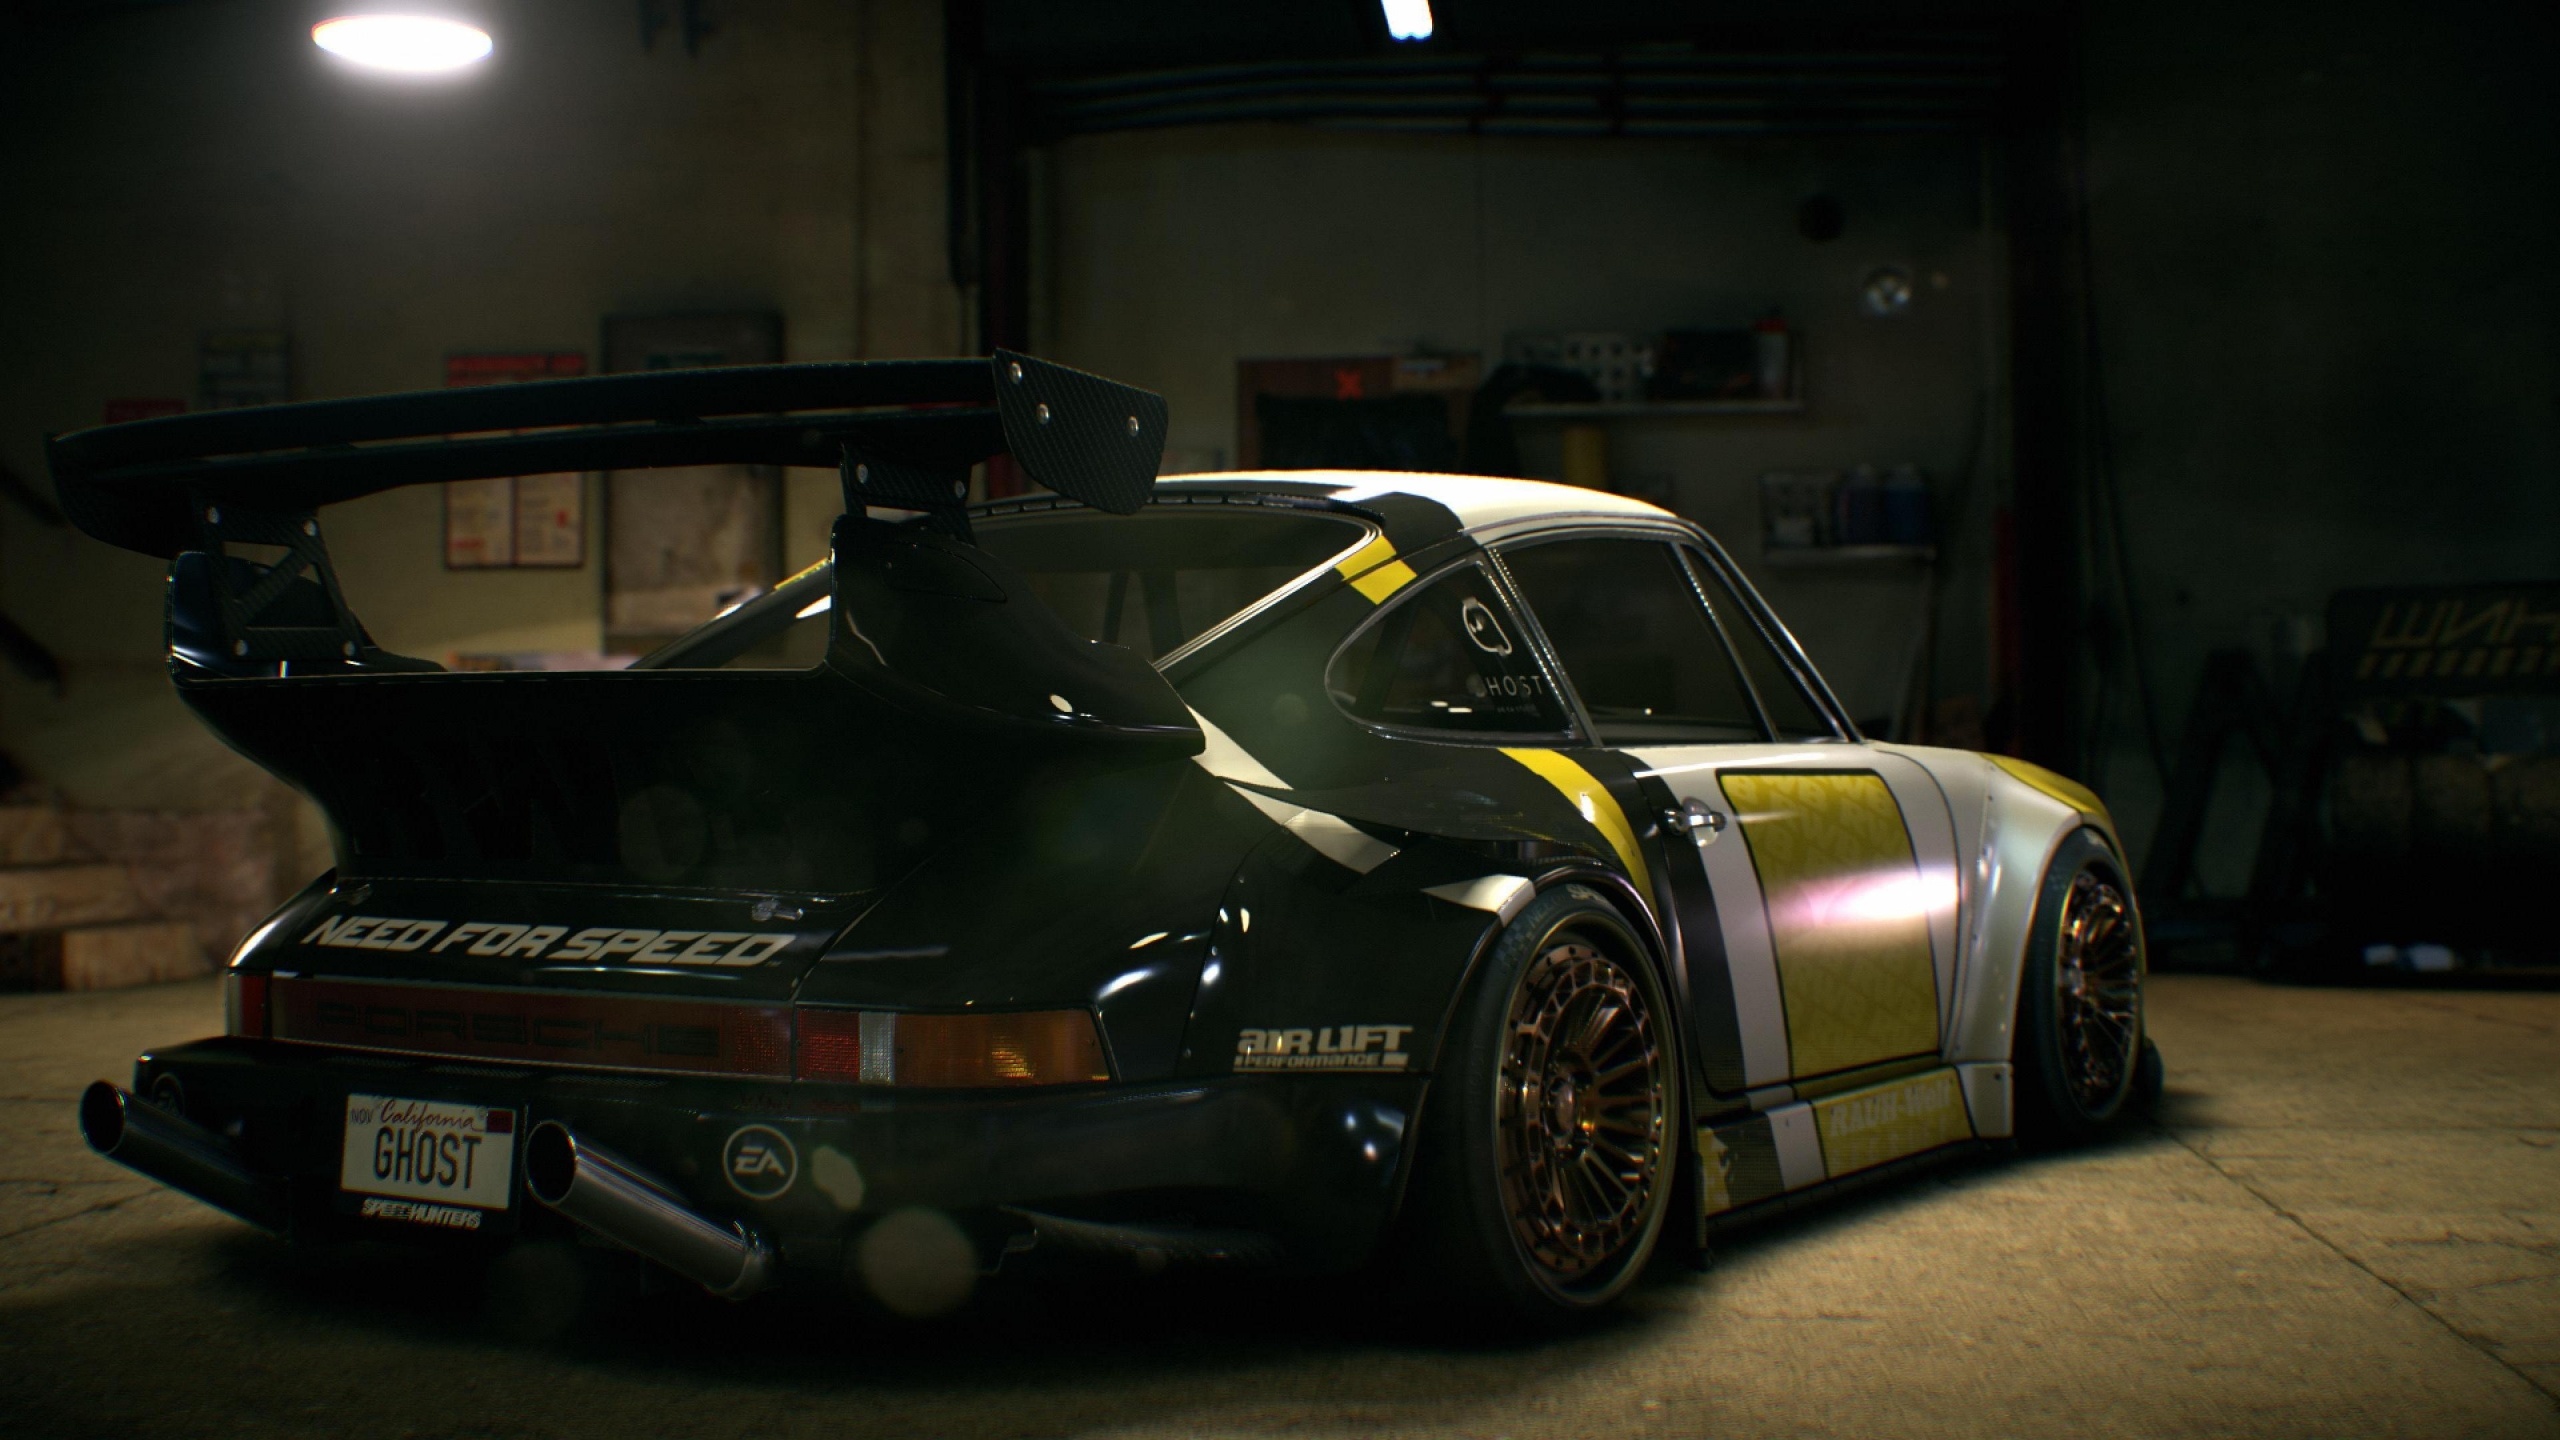 Need For Speed Porsche Ghost for 2560x1440 HDTV resolution